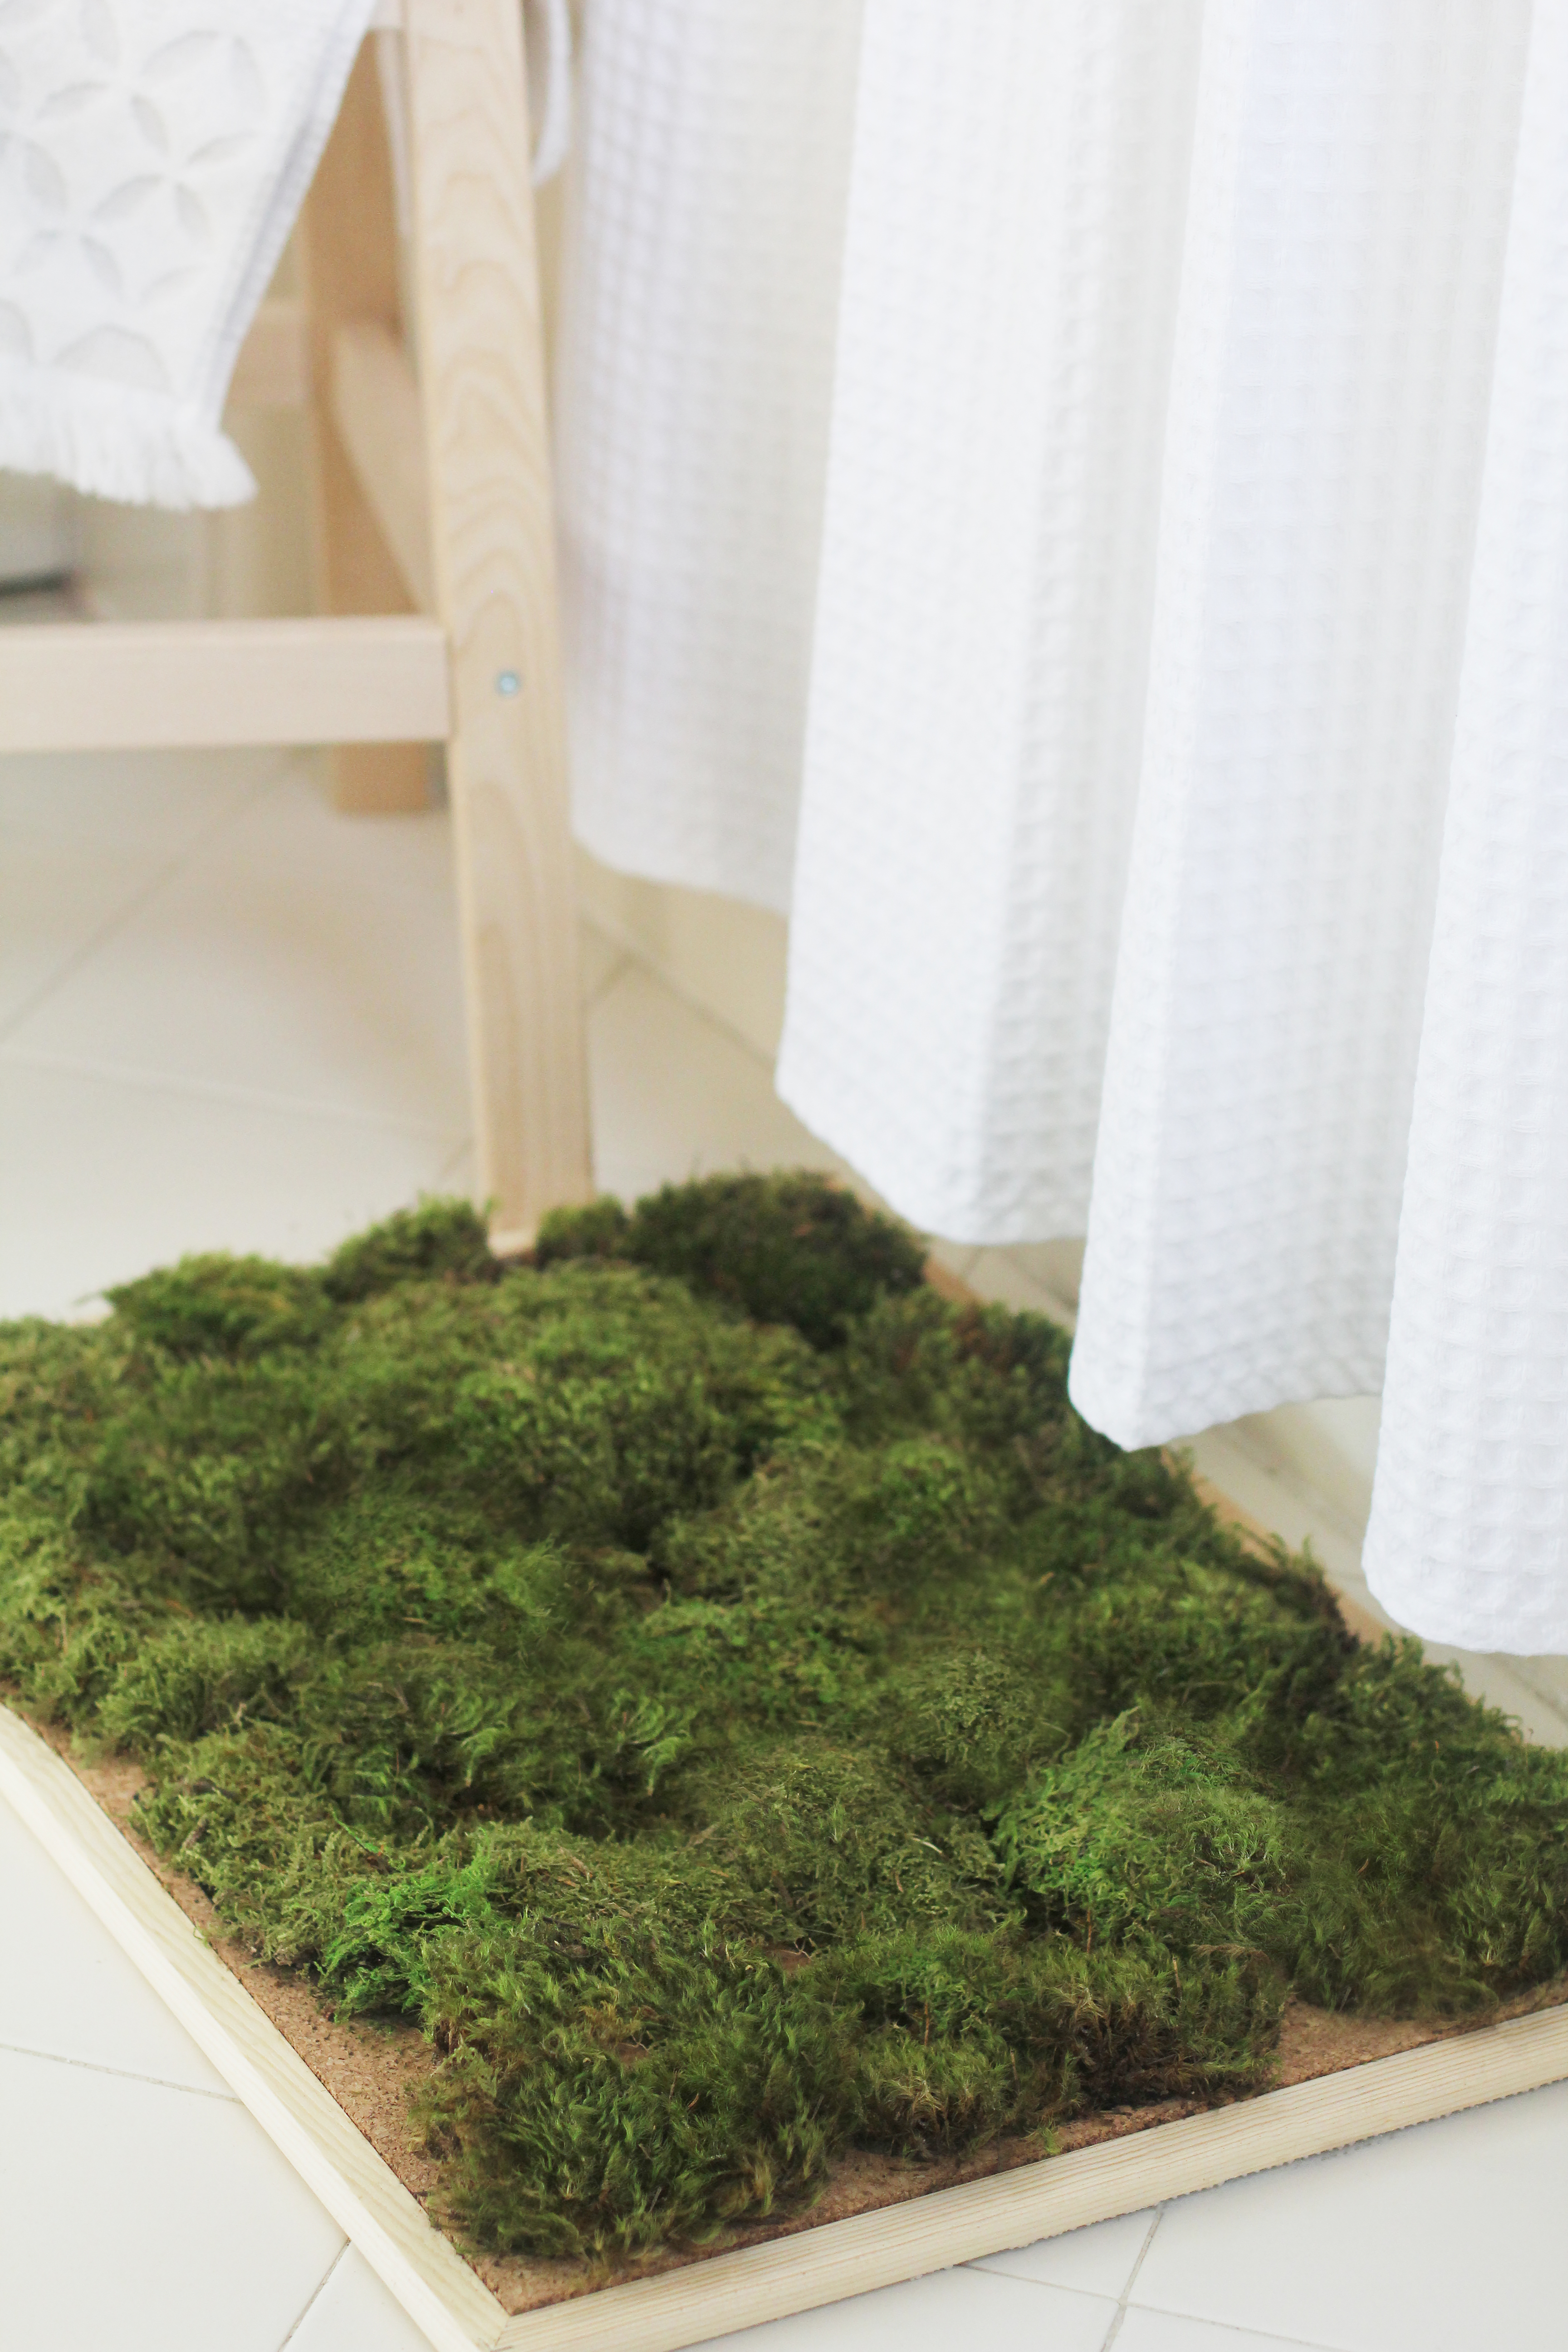 Living Bath Mats: The Moss Carpet Brings the Outdoors Into Your Bathroom